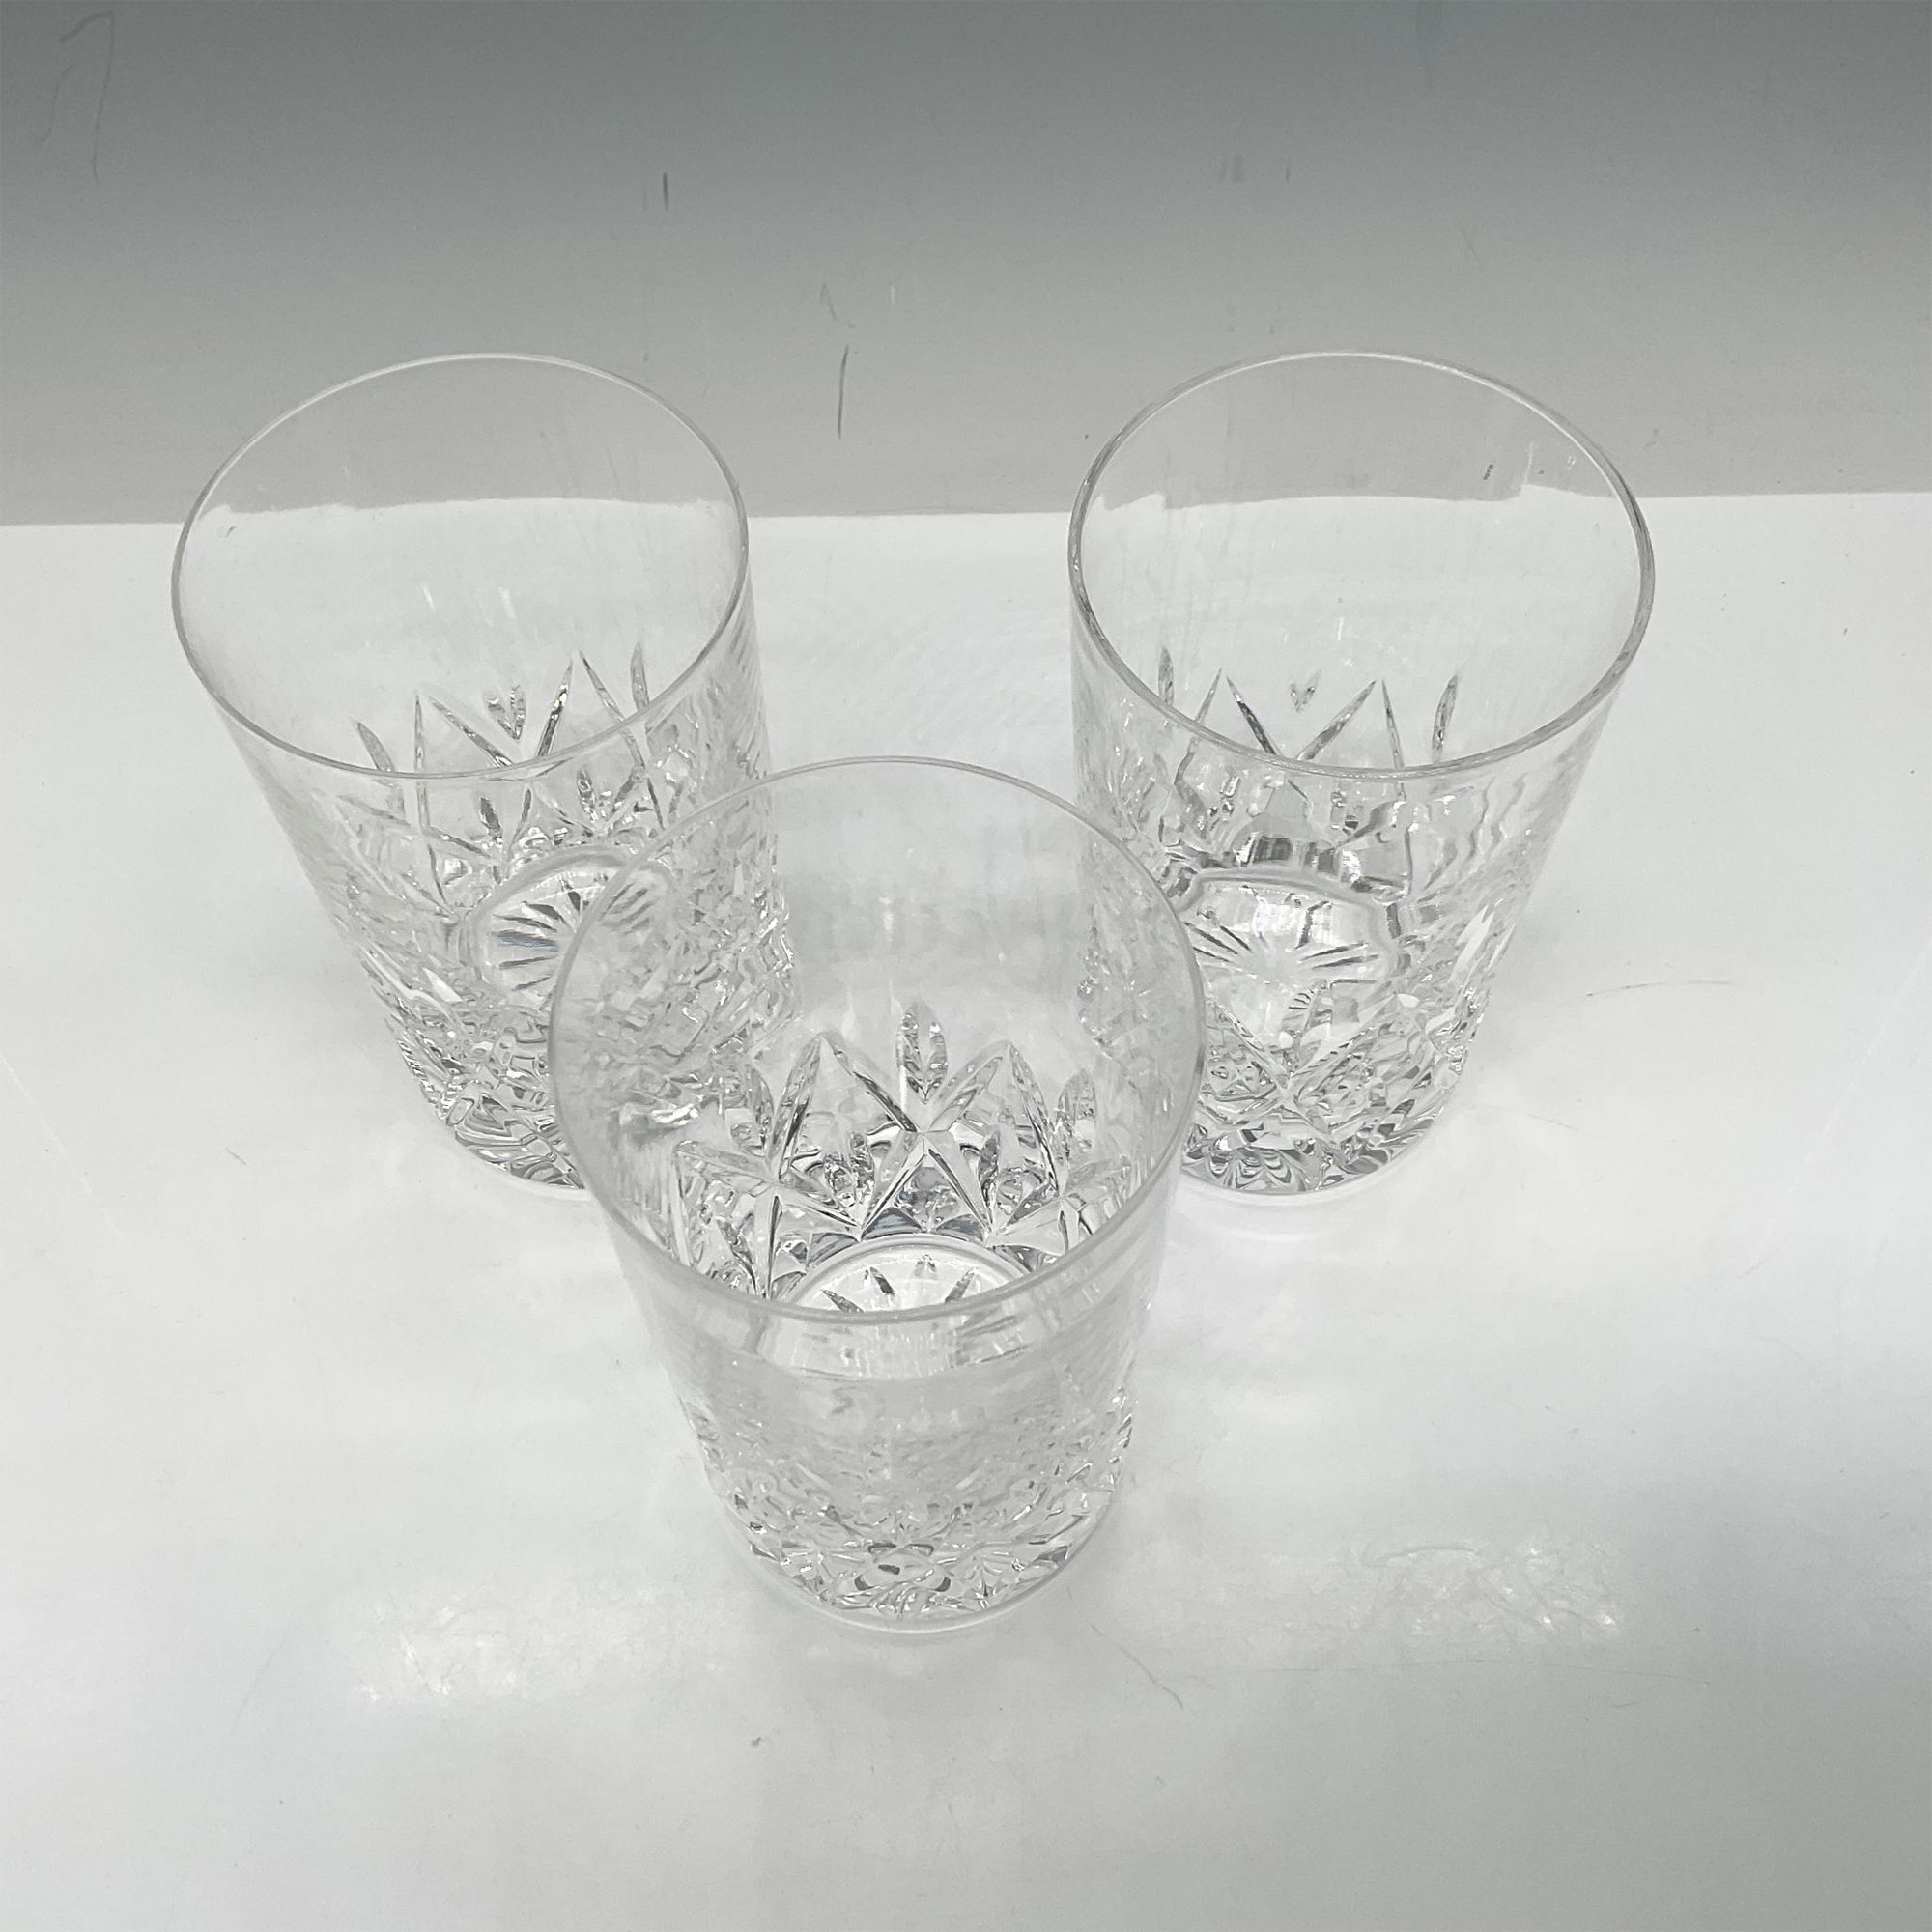 3pc Waterford Crystal Highball Glasses - Image 2 of 3